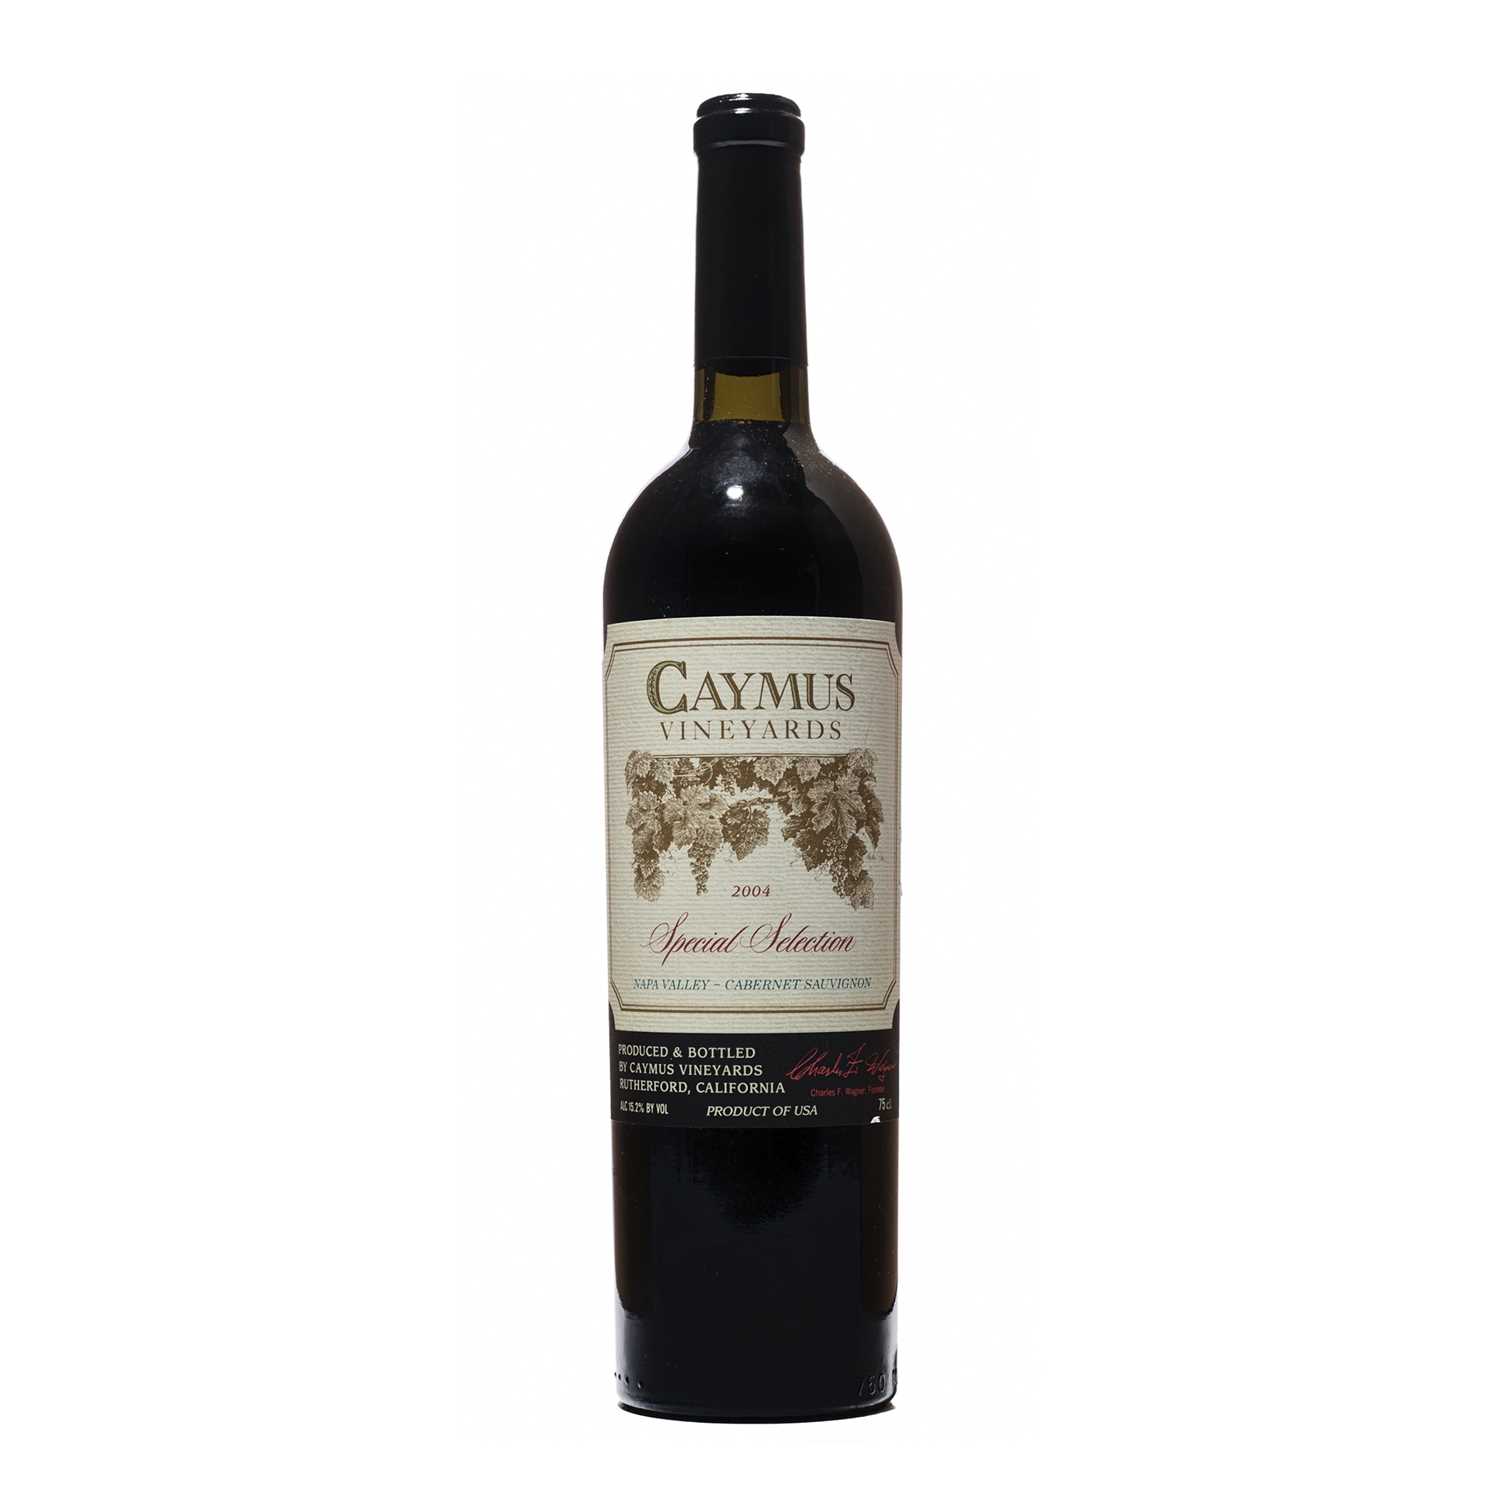 Lot 140 - 1 bottle 2004 Caymus Special Selection CS